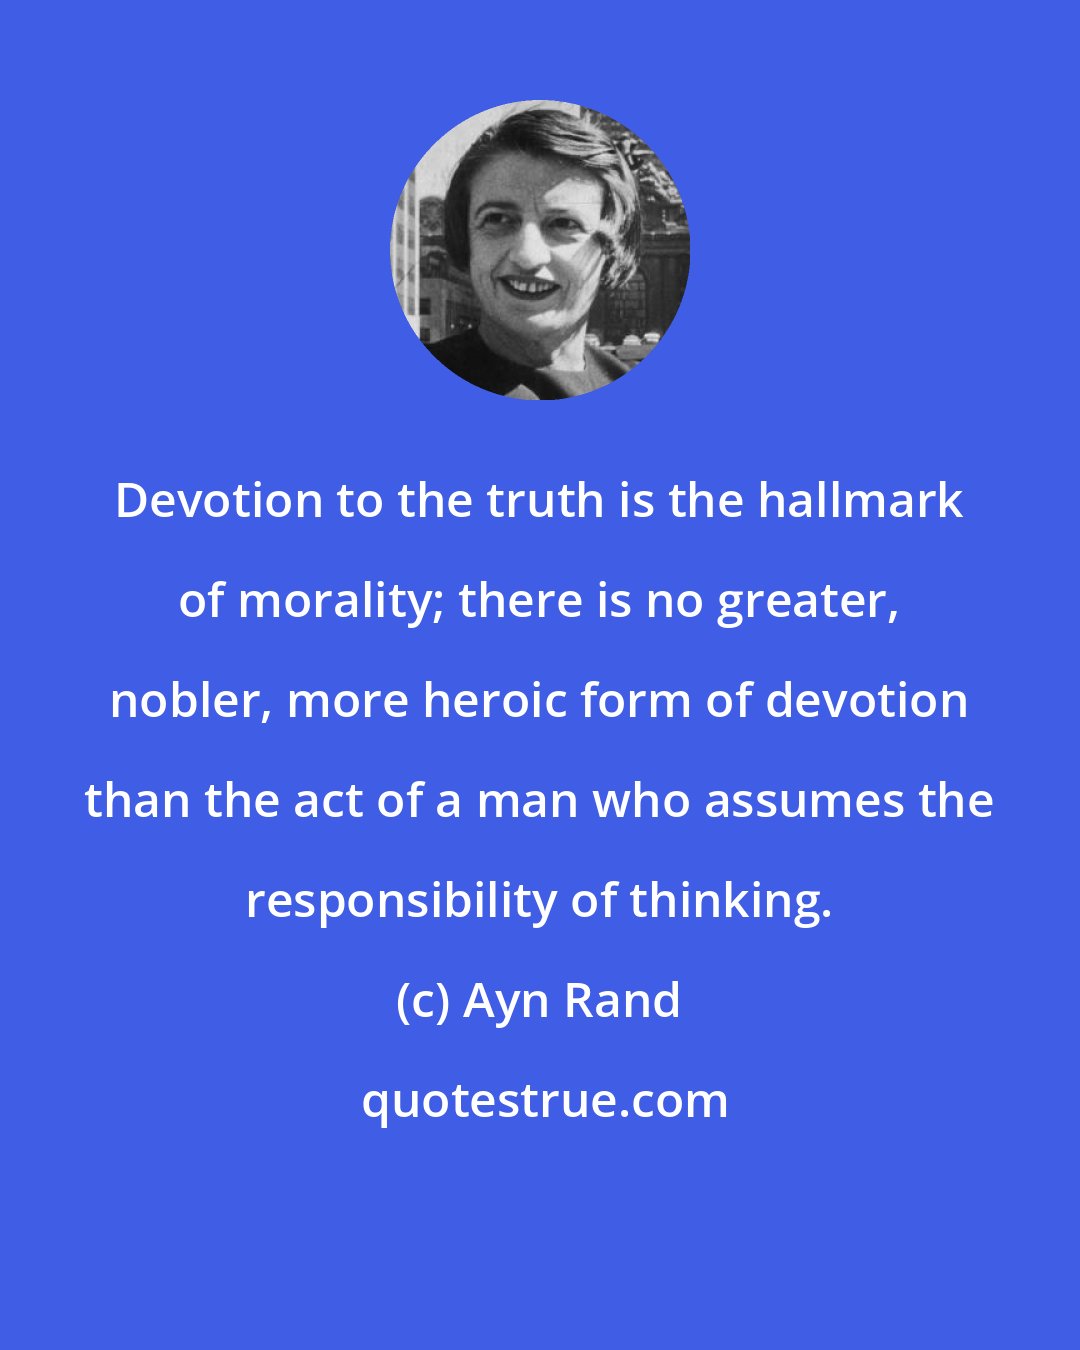 Ayn Rand: Devotion to the truth is the hallmark of morality; there is no greater, nobler, more heroic form of devotion than the act of a man who assumes the responsibility of thinking.